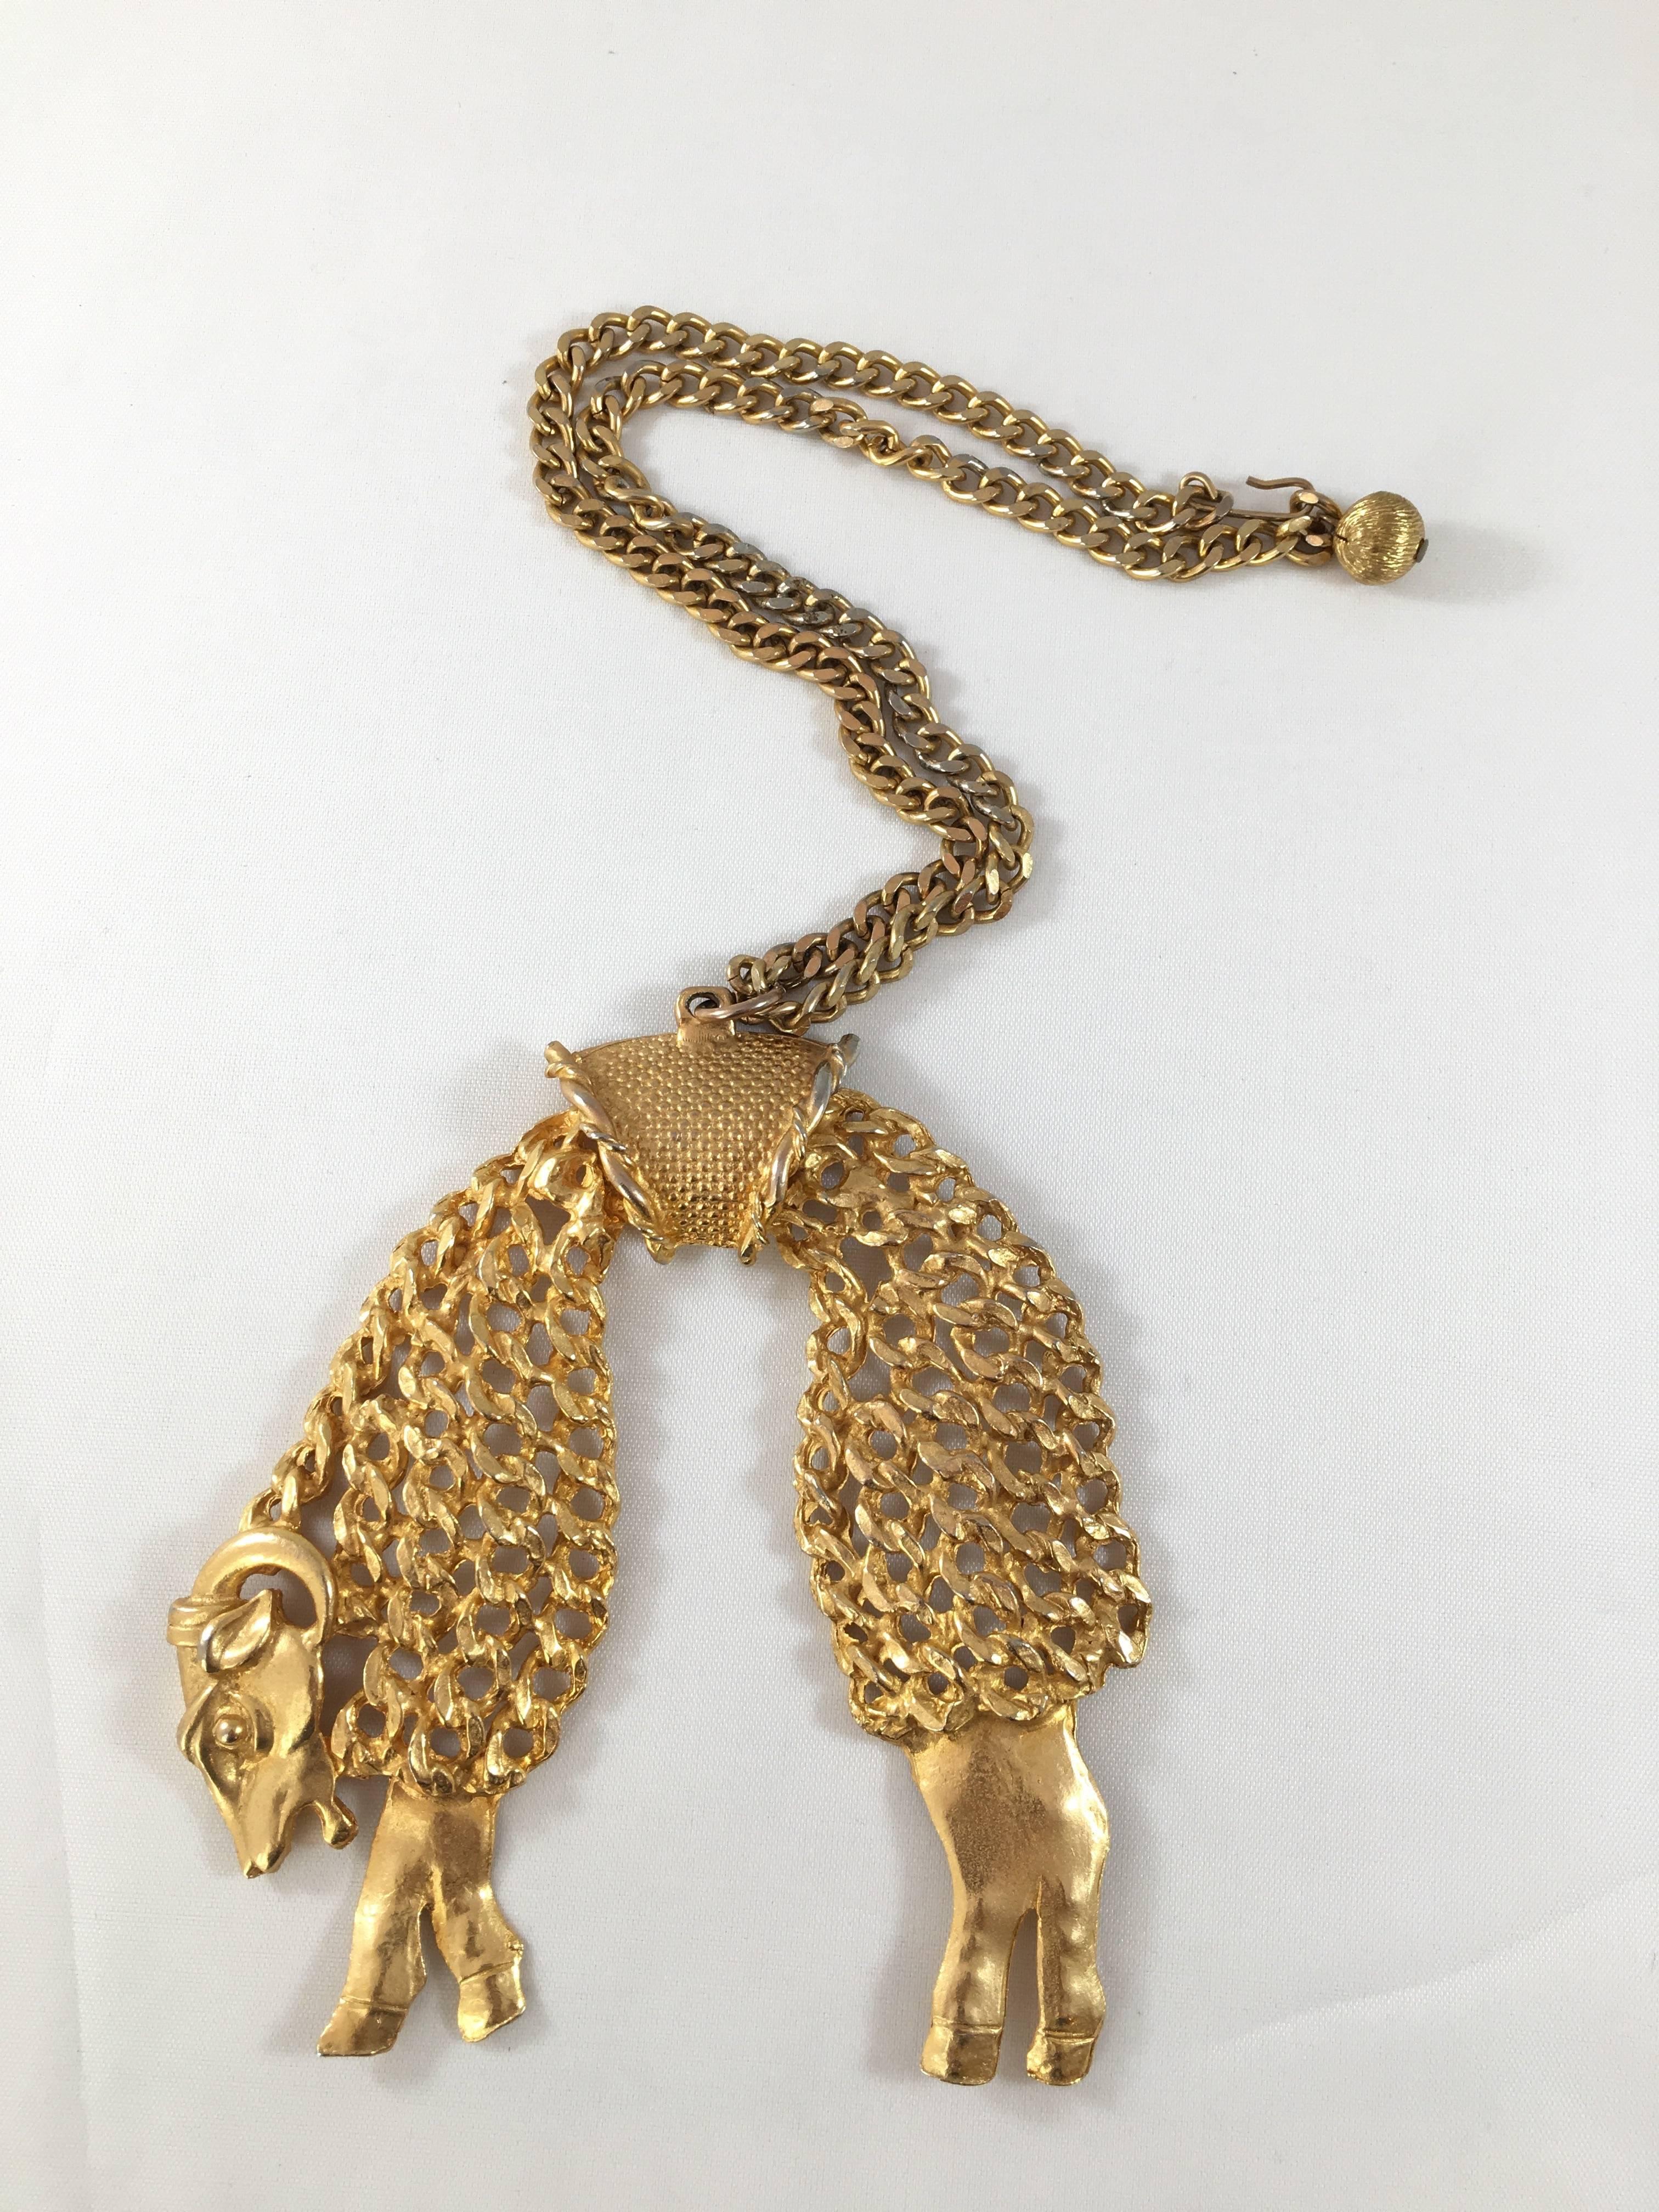 This is a rare 1970s golden fleece sheep pendant necklace from Kenneth Jay Lane. The pendant is huge. It measures 4 1/2" long x 3 1/2" wide. The chain is 18 1/2" long. The pendant is made up of two articulated sections - the front of